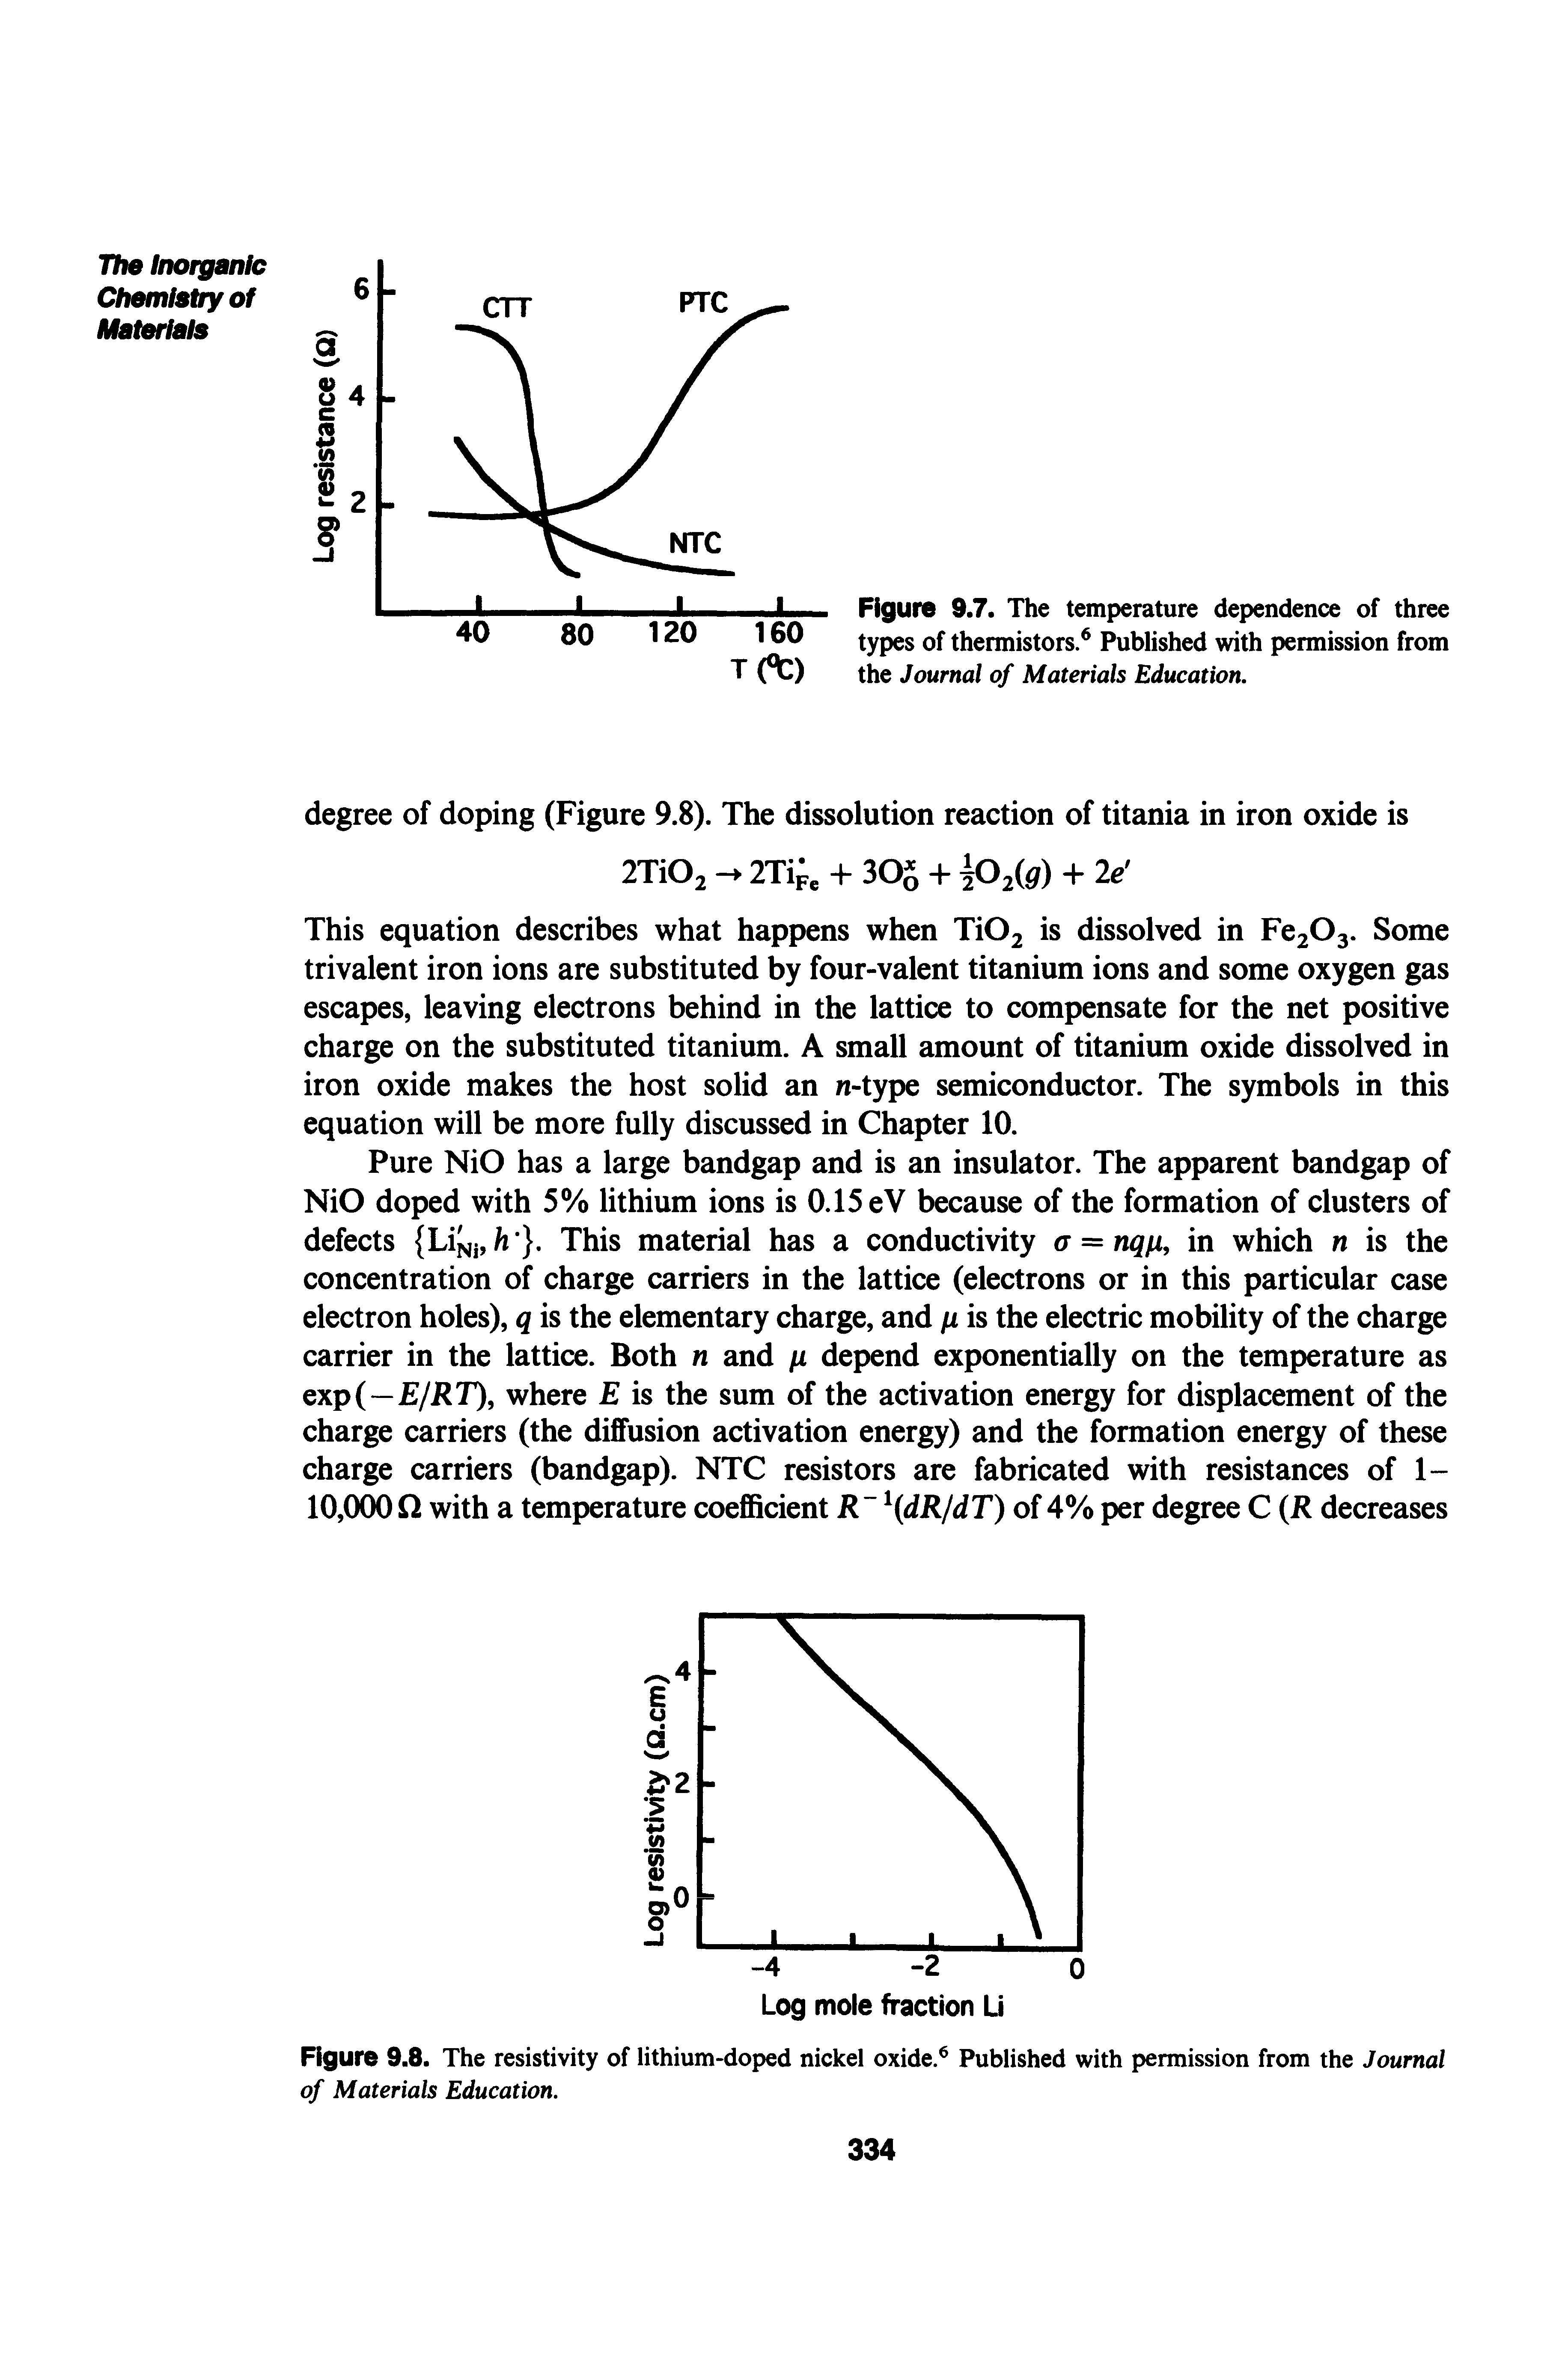 Figure 9.8. The resistivity of lithium-doped nickel oxide. Published with permission from the Journal of Materials Education.